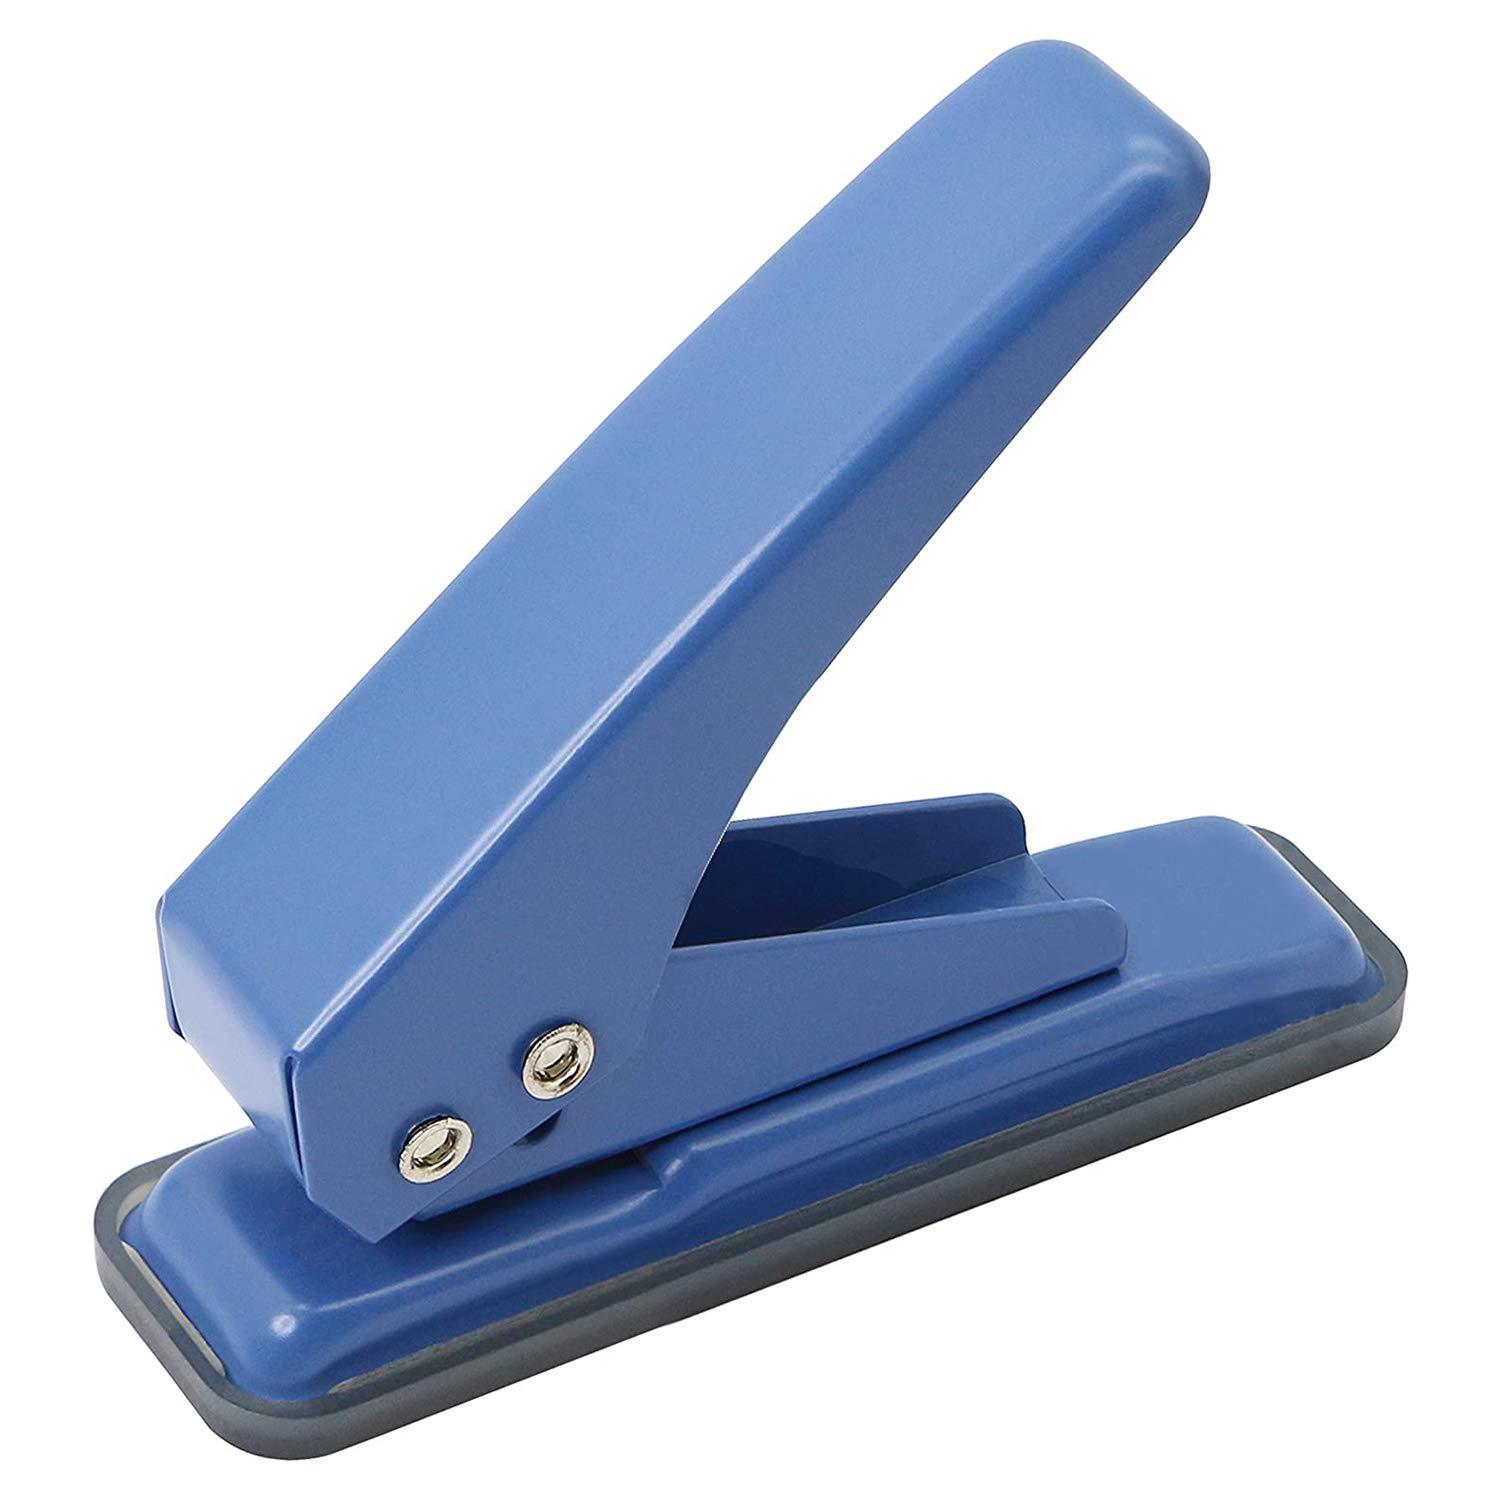 Hutou RNAB08FY9XH44 single handheld 1/4 inches hole punch, 20 sheet puncher  heavy duty paper hole punch capacity metal hole puncher with skid-res